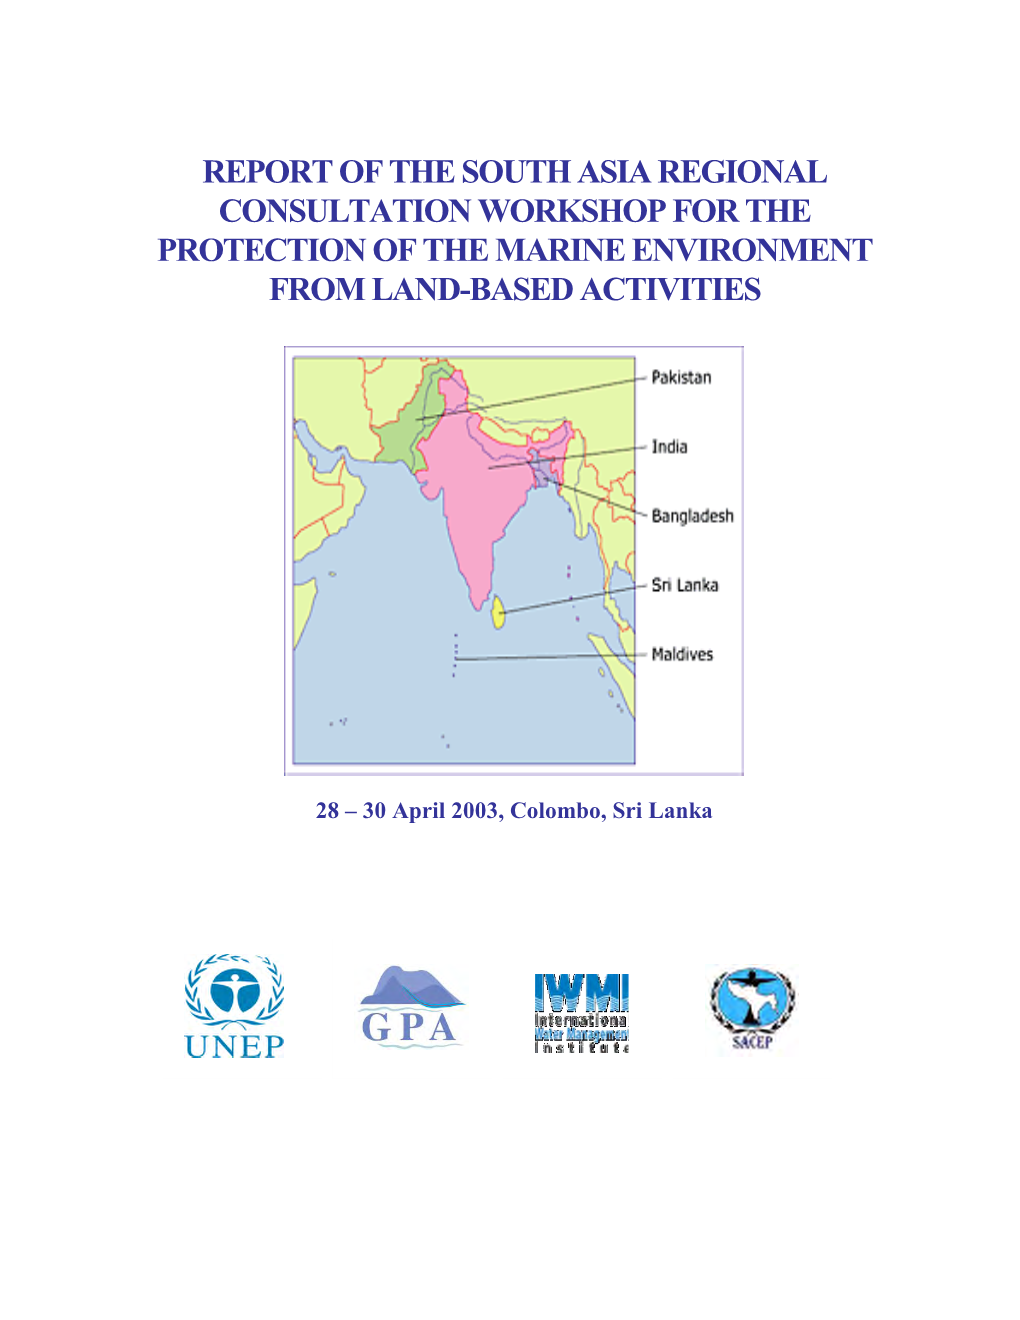 Report of the South Asia Regional Consultation Workshop for the Protection of the Marine Environment from Land-Based Activities